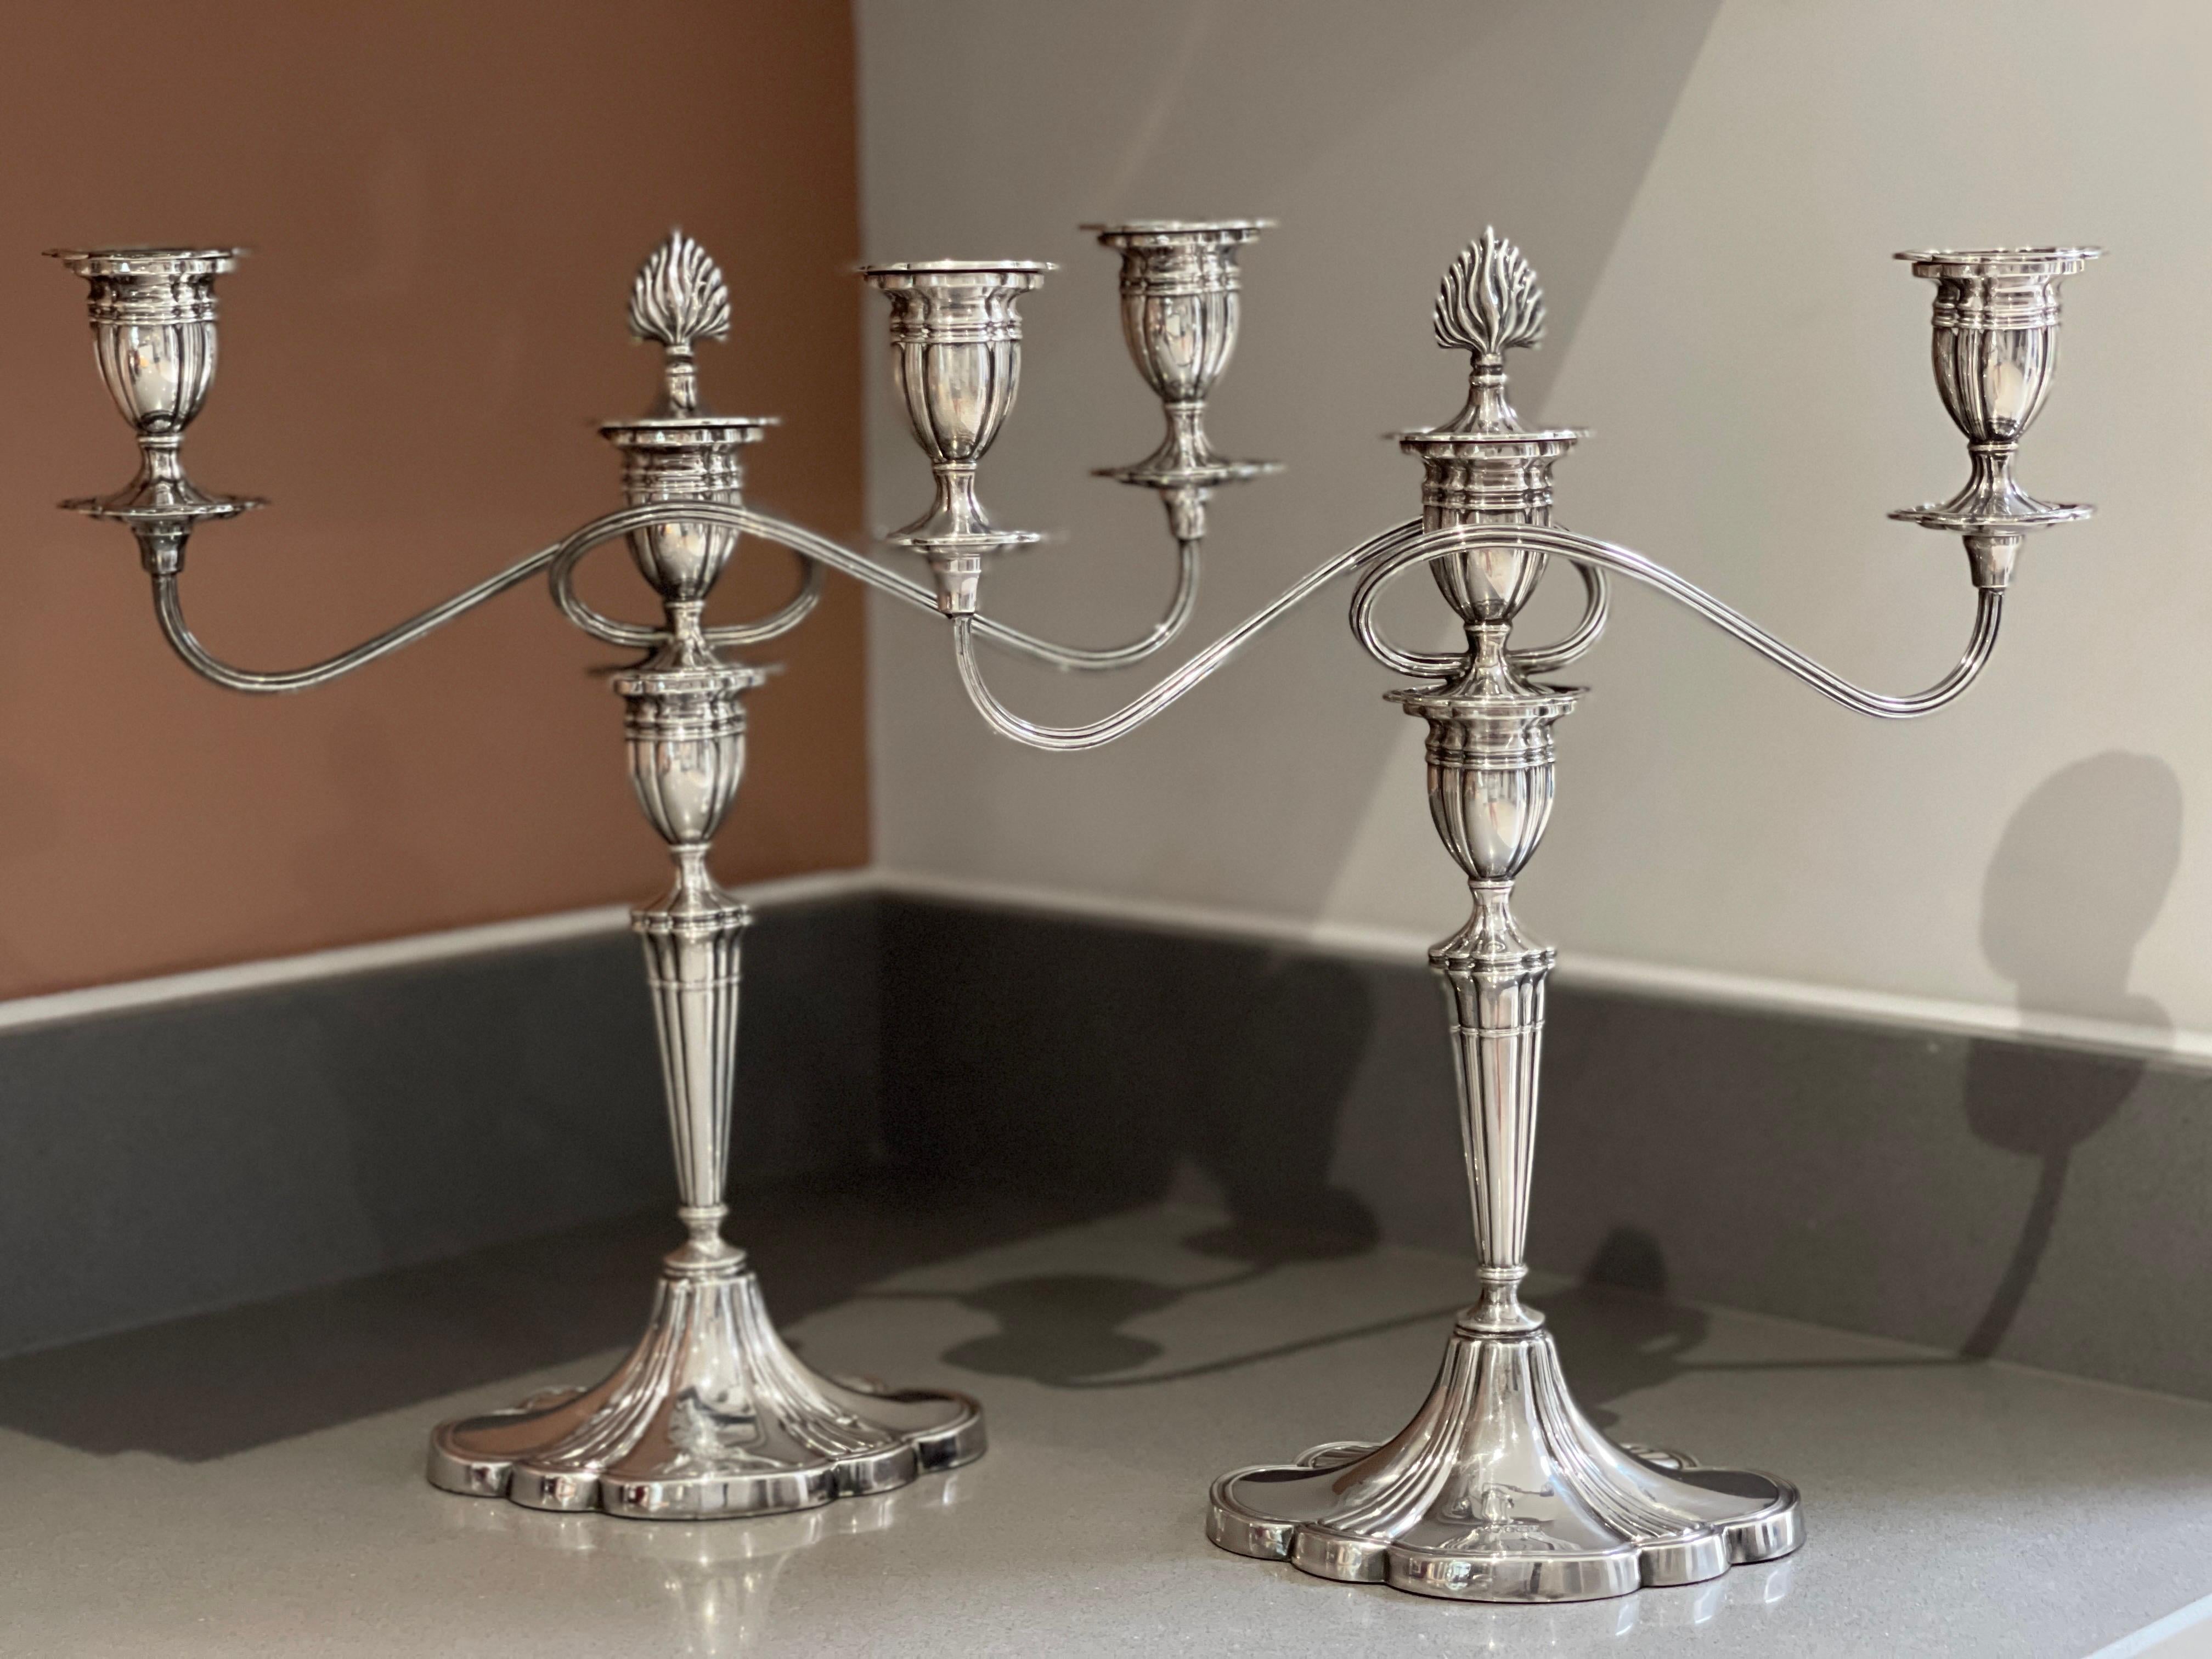 A pair of elegant and pure sterling silver 925 large antique hallmarked three light candelabra in the late 19th century taste.
These fine candelabra have shaped oval bases and fluted stems. All the nozzles are fully detachable to assist in cleaning.